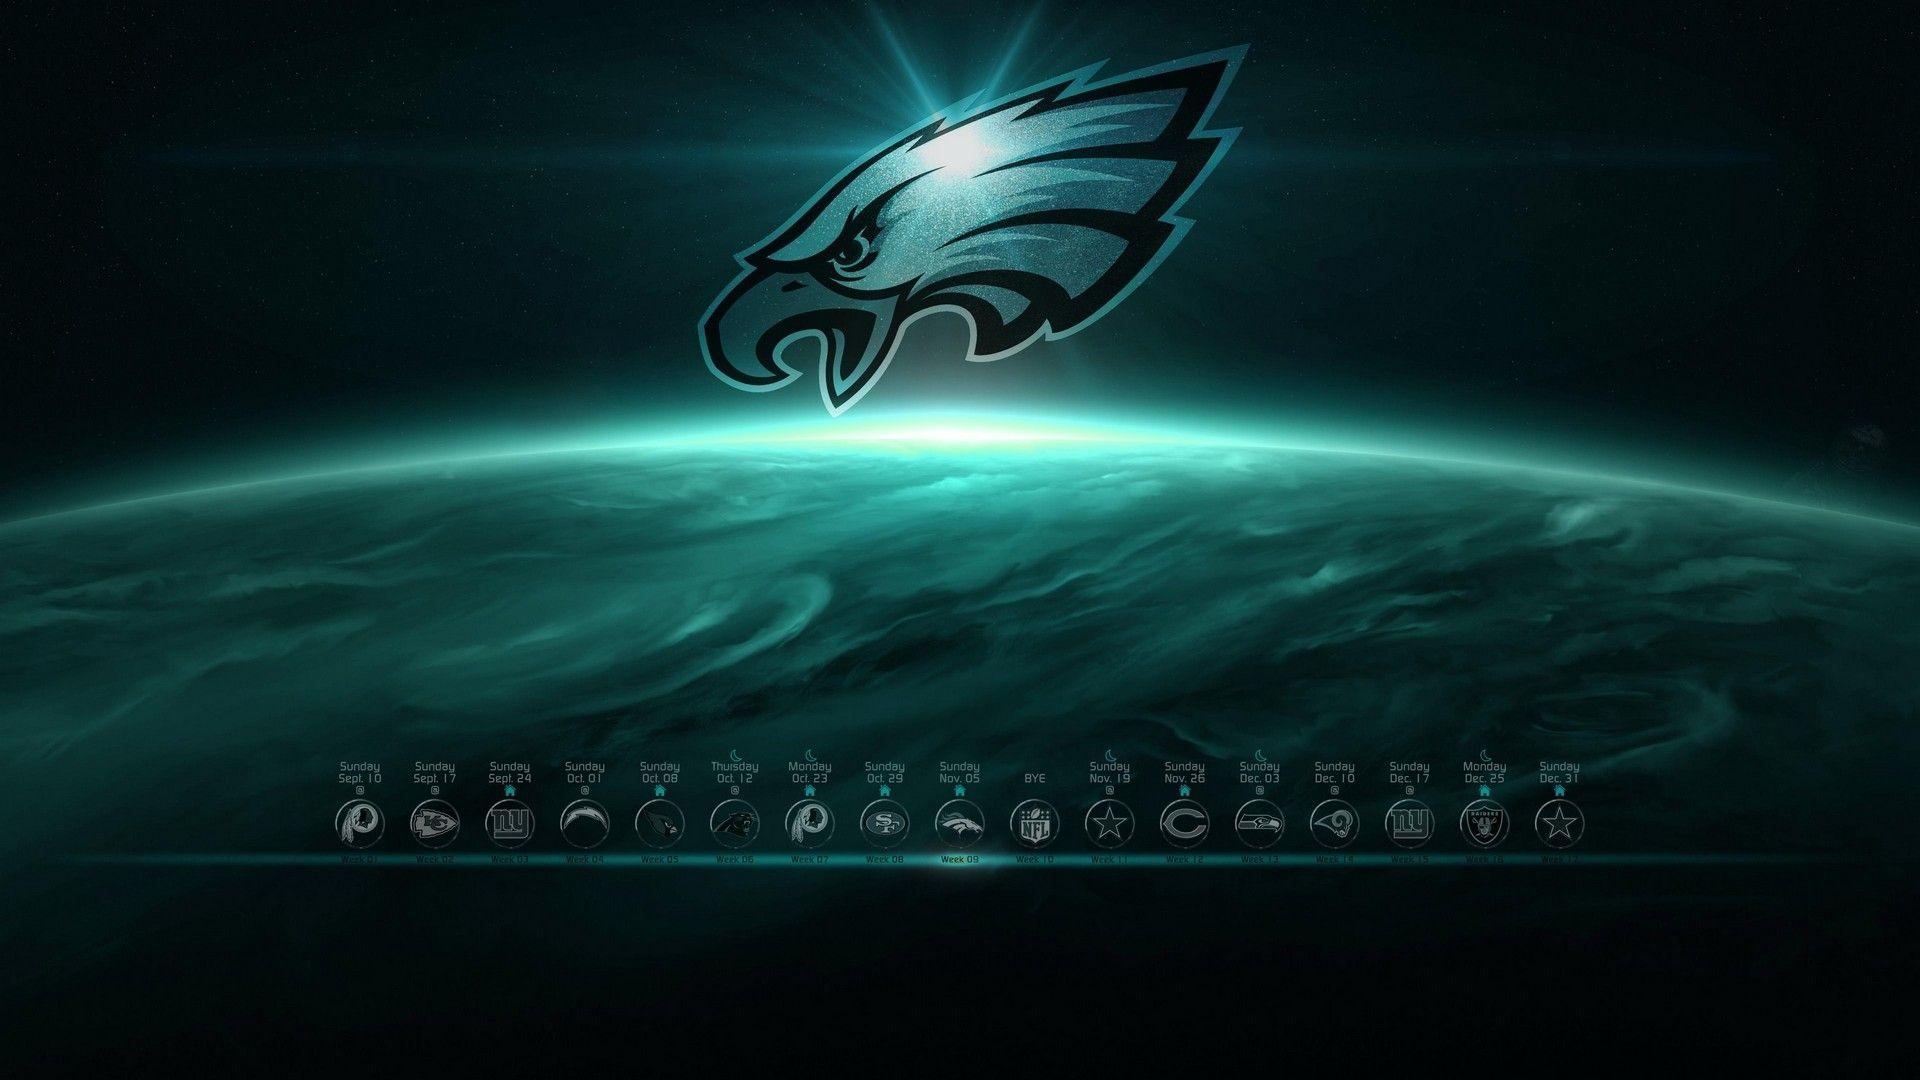 NFL Eagles Wallpapers For Mac Backgrounds